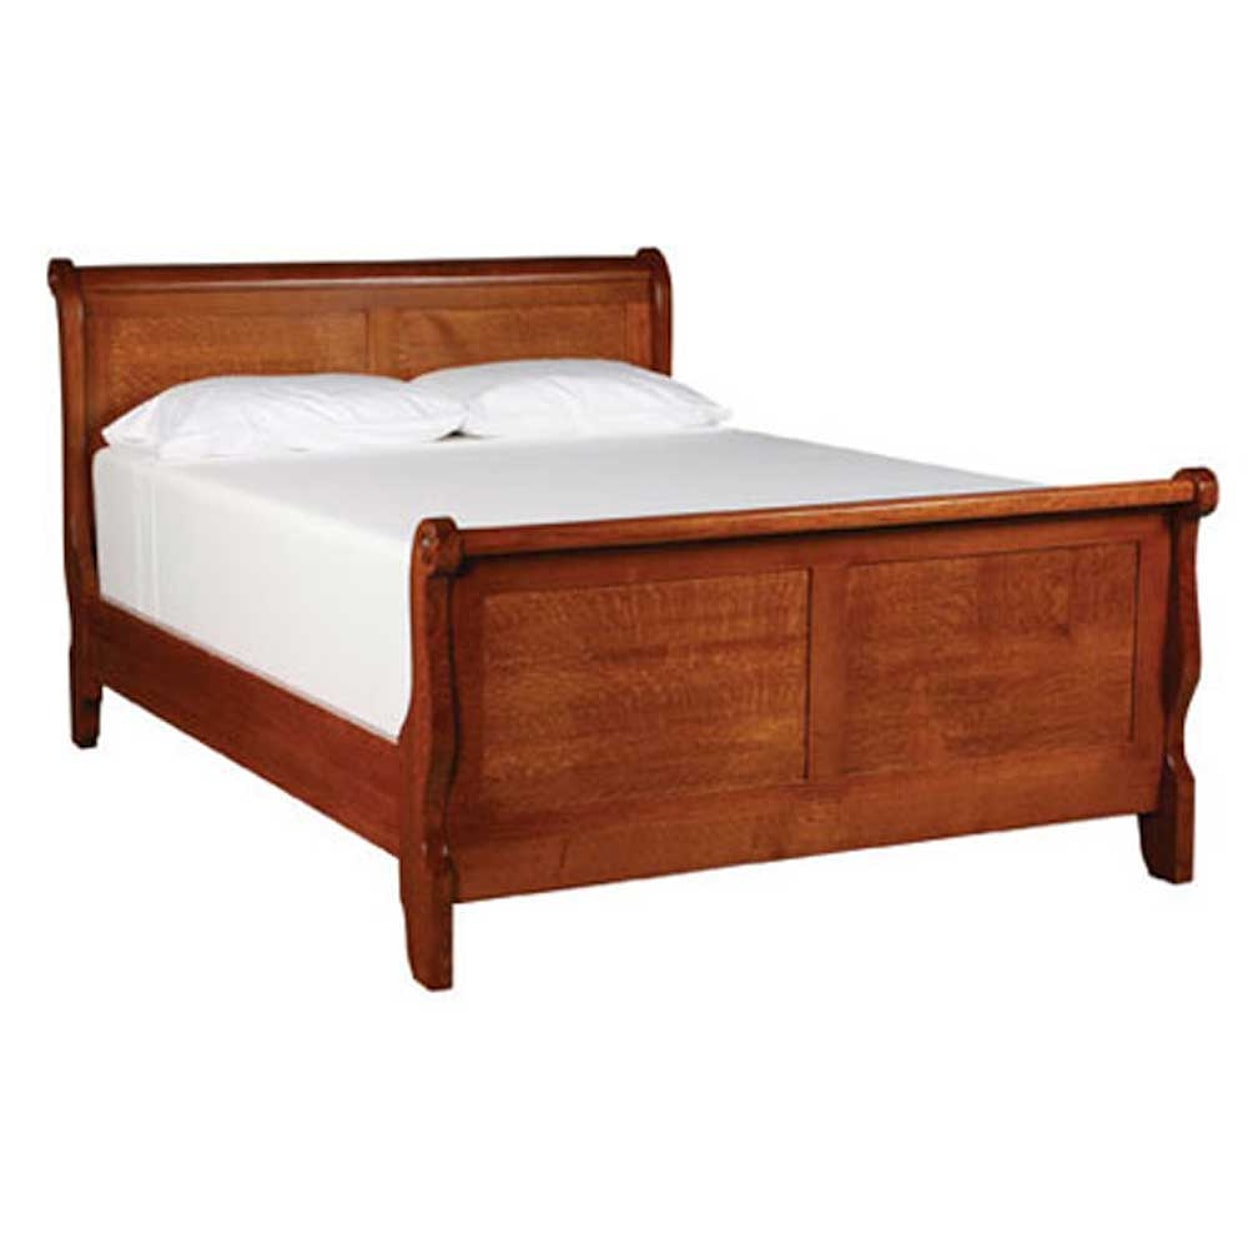 Simply Amish Empire King Sleigh Bed